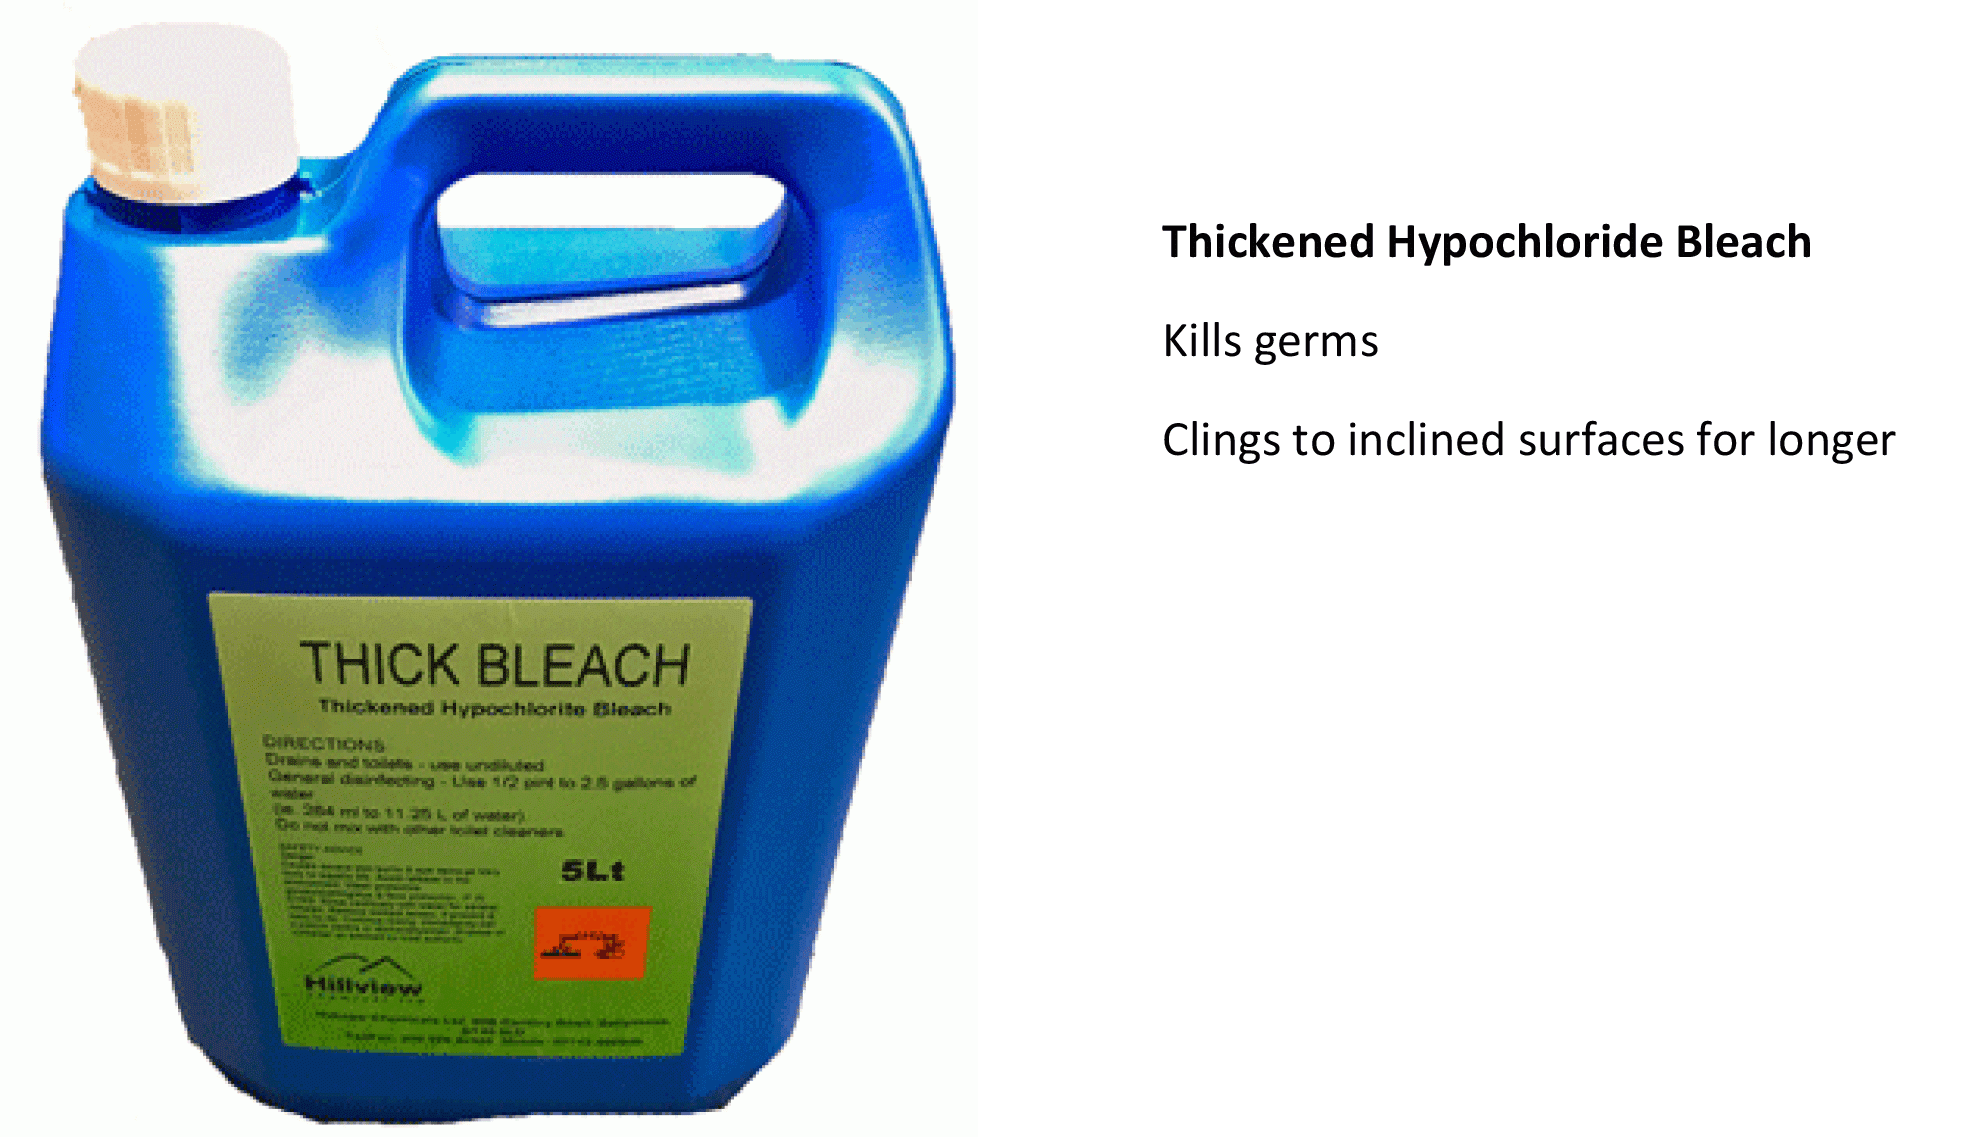 Thickened-Hypochloride-Bleach-info.gif#a